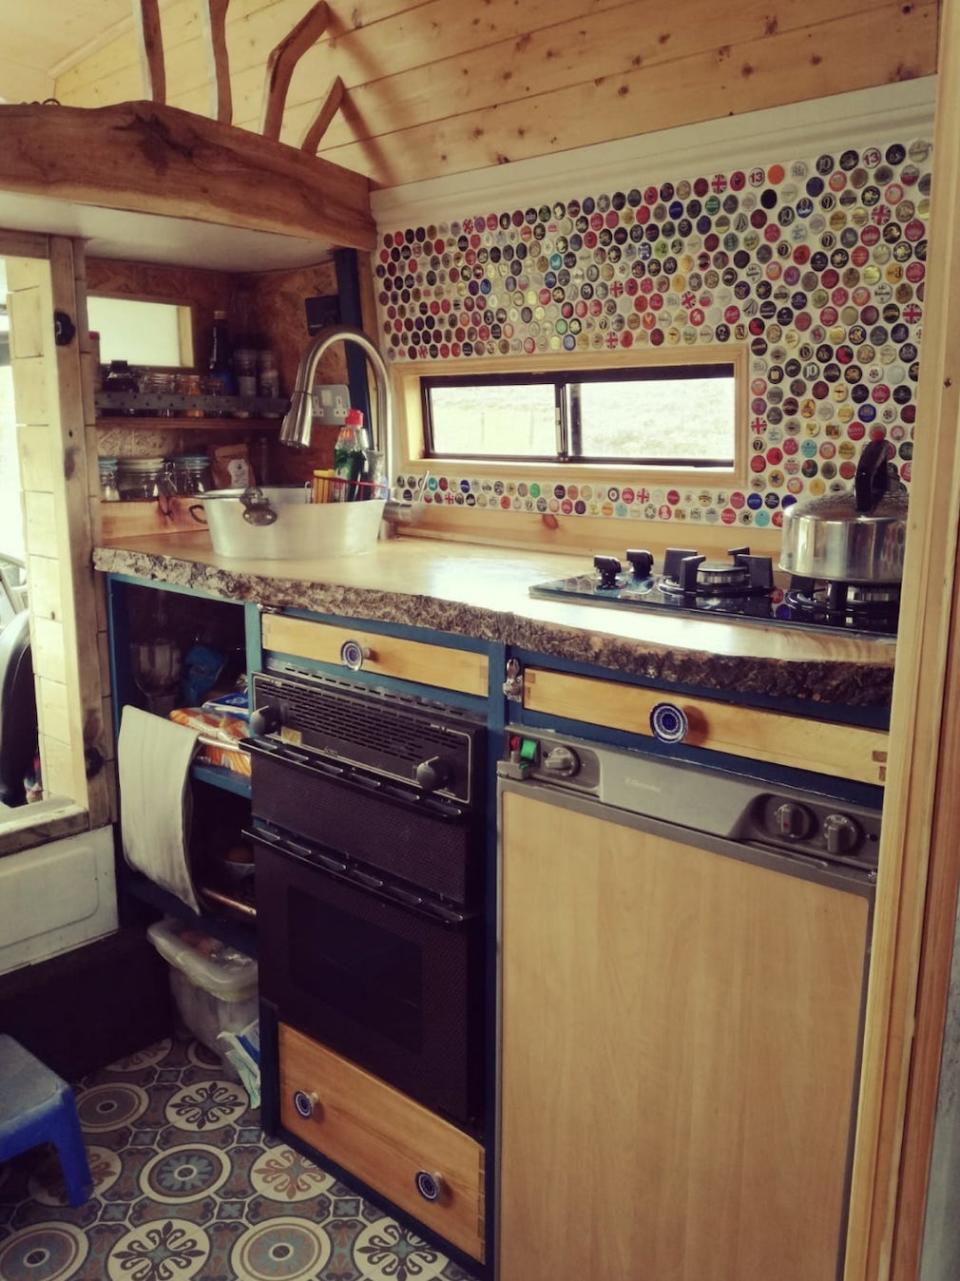 A tiled kitchen with a gas oven and stovetop in the Firetruck Family's van conversion.